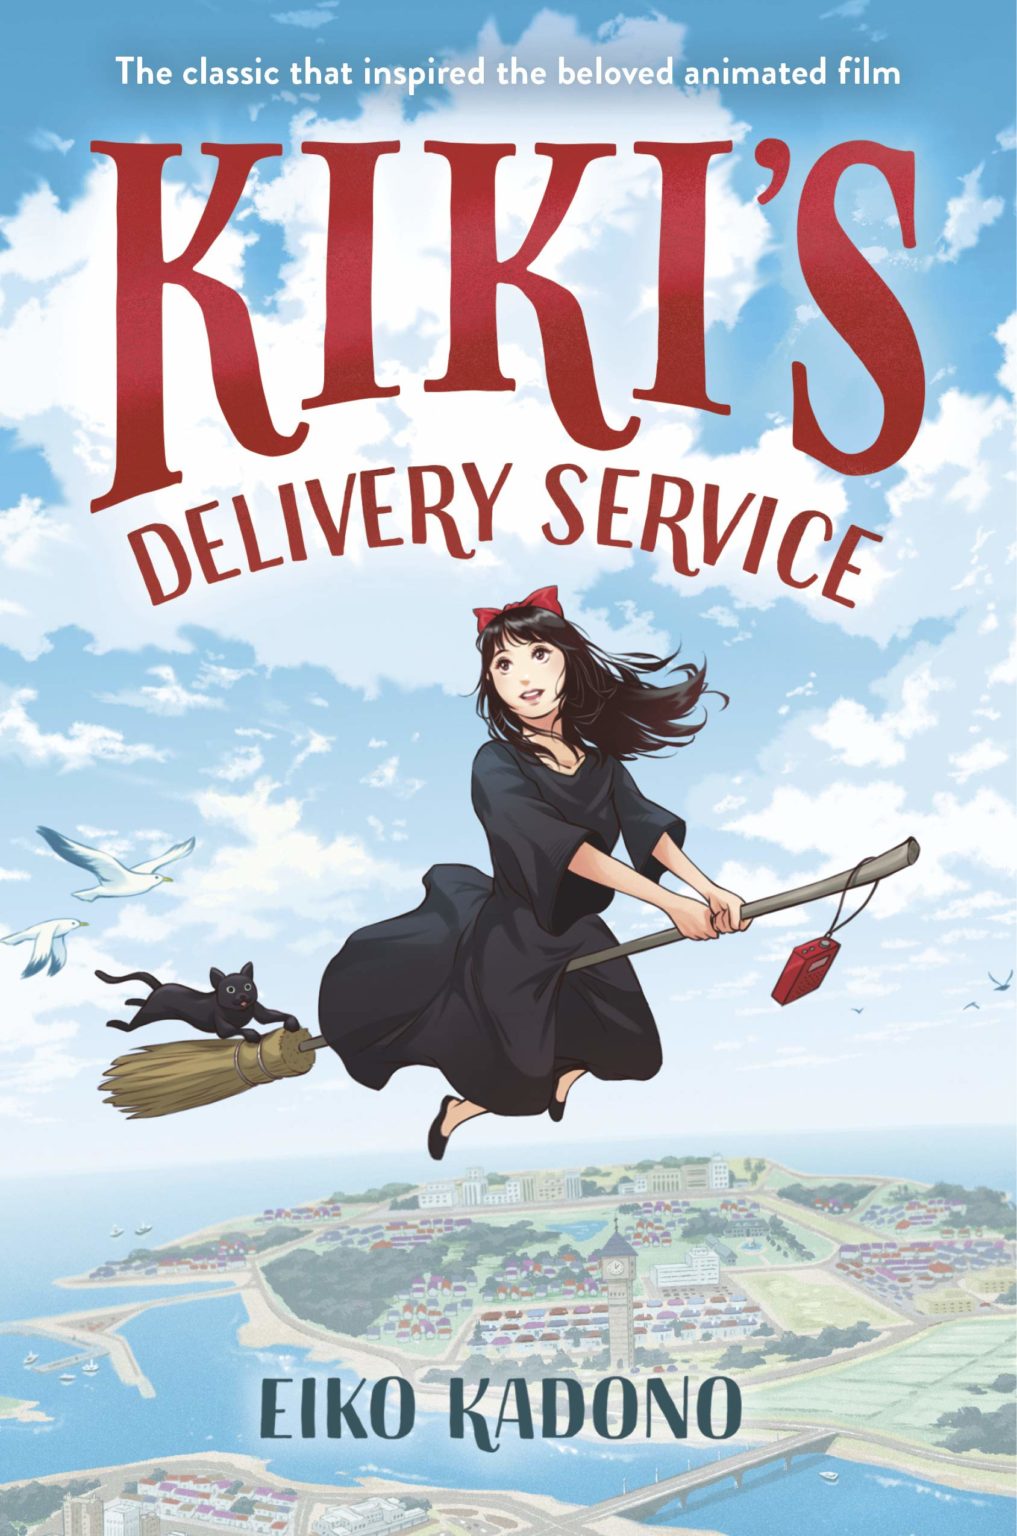 Cover for Kiki's Delivery Service featuring an illustration of a young woman in a black dress with a red bow on her hair who is a witch on a broomstick in the sky with a black cat hanging off the end holding on as if it's about to fall and a red purse hanging off the tip of the broomstick's handle. In the background is a view of the landscape from above like you might see from an airplane. The cover's title is displayed in dark red.